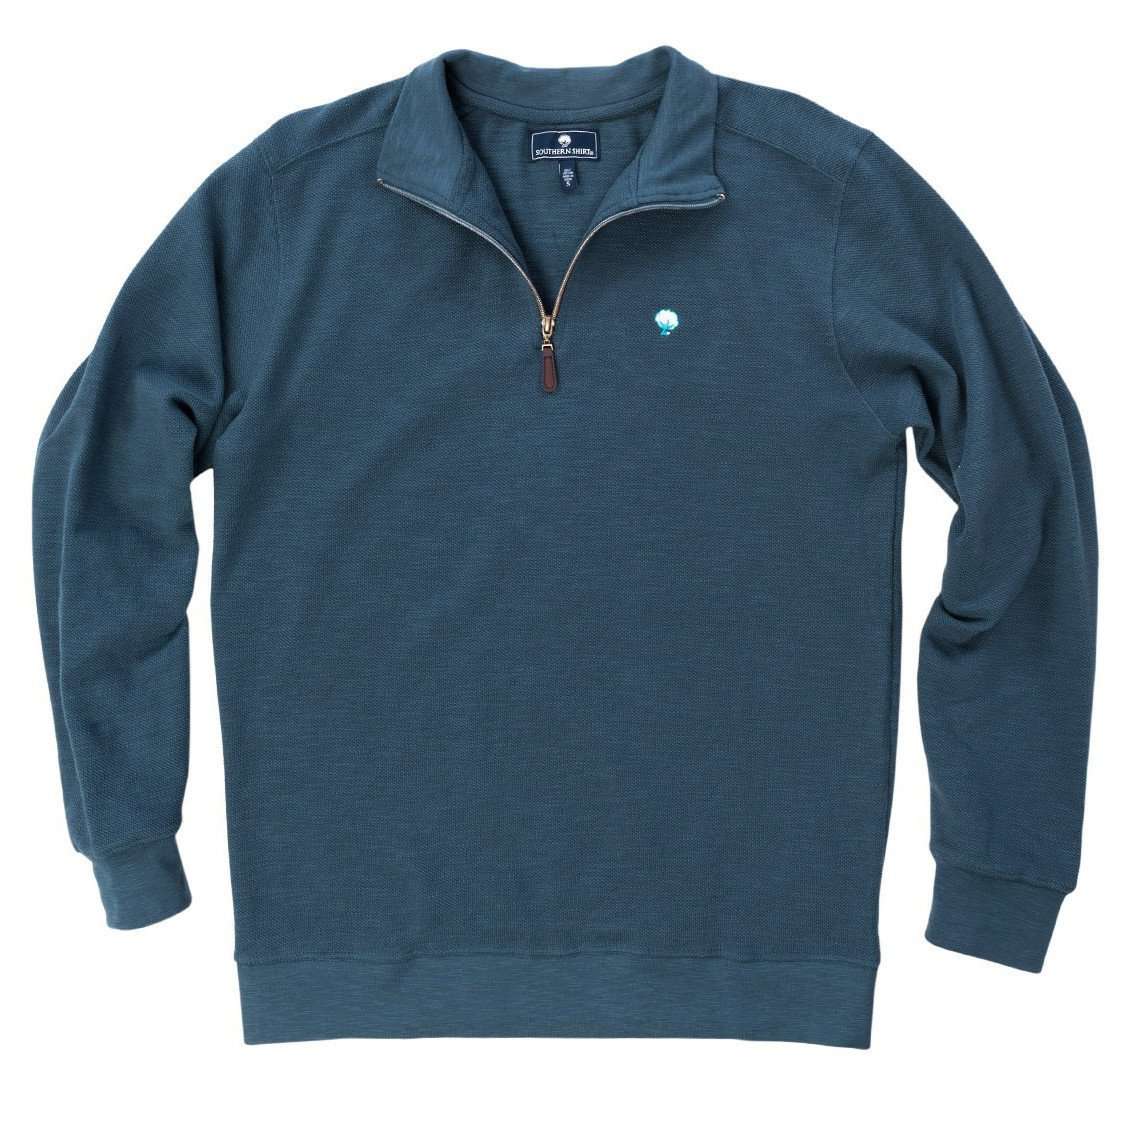 Pique Knit Pullover in Indian Teal by The Southern Shirt Co. - Country Club Prep